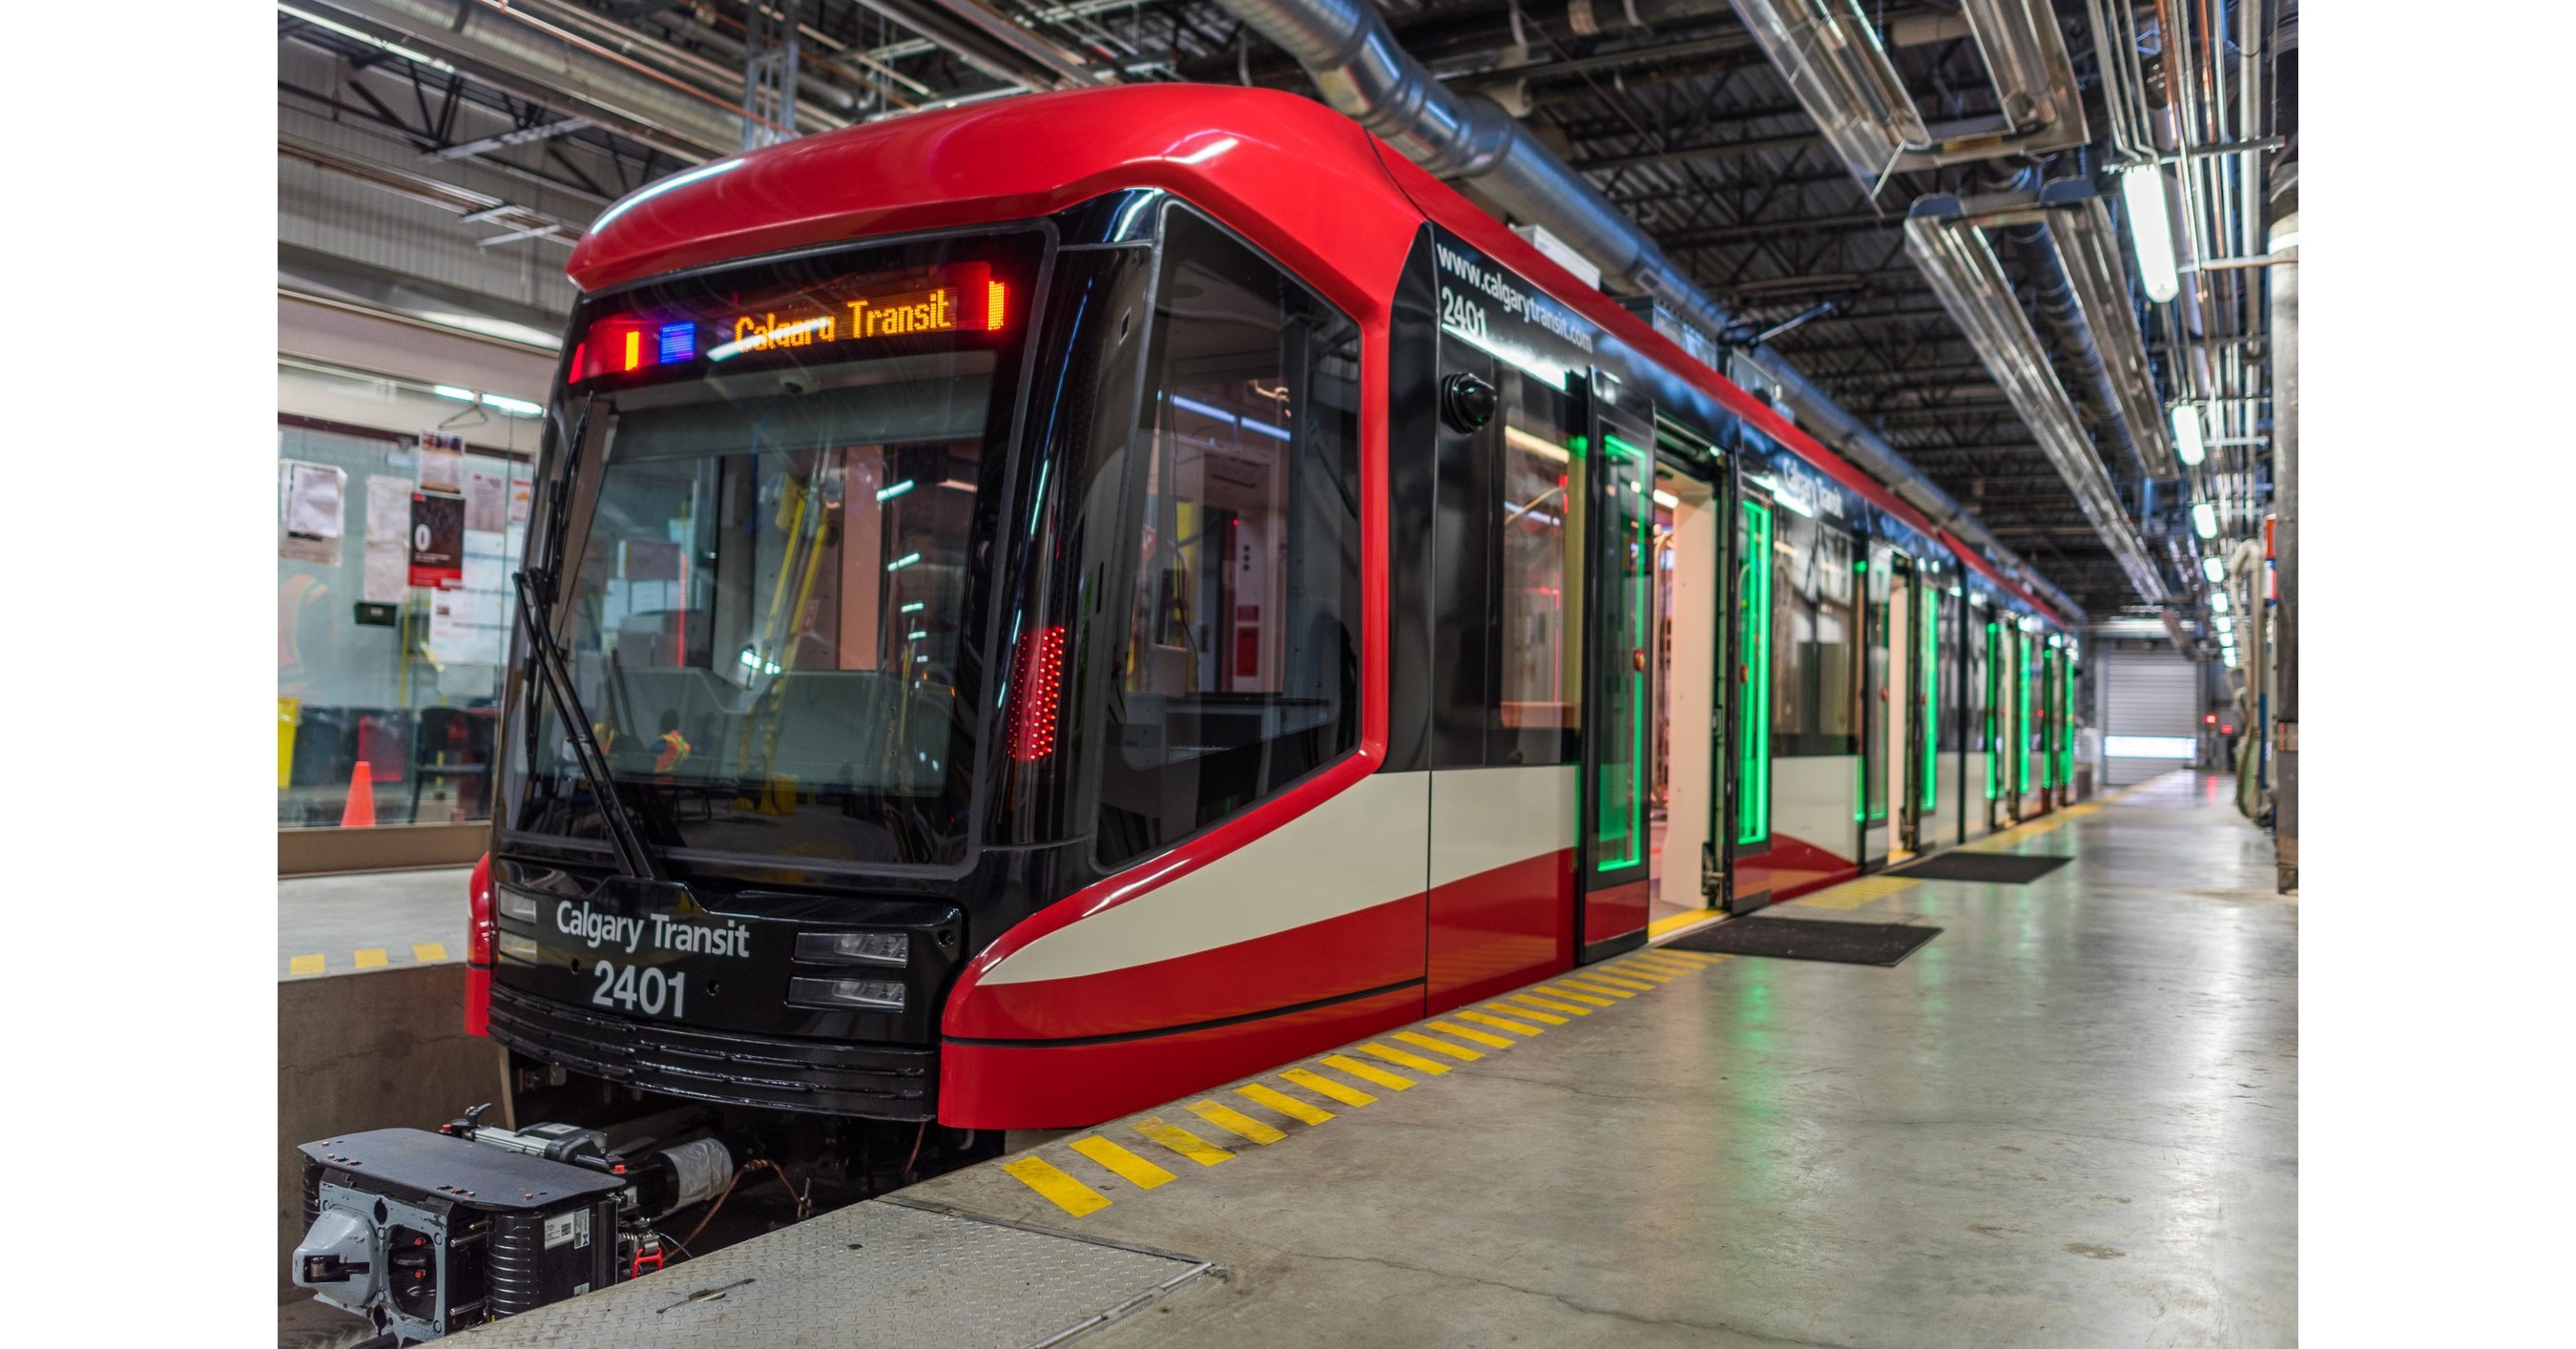 calgary-to-modernize-public-transit-system-with-conduent-transportation-technology-and-services